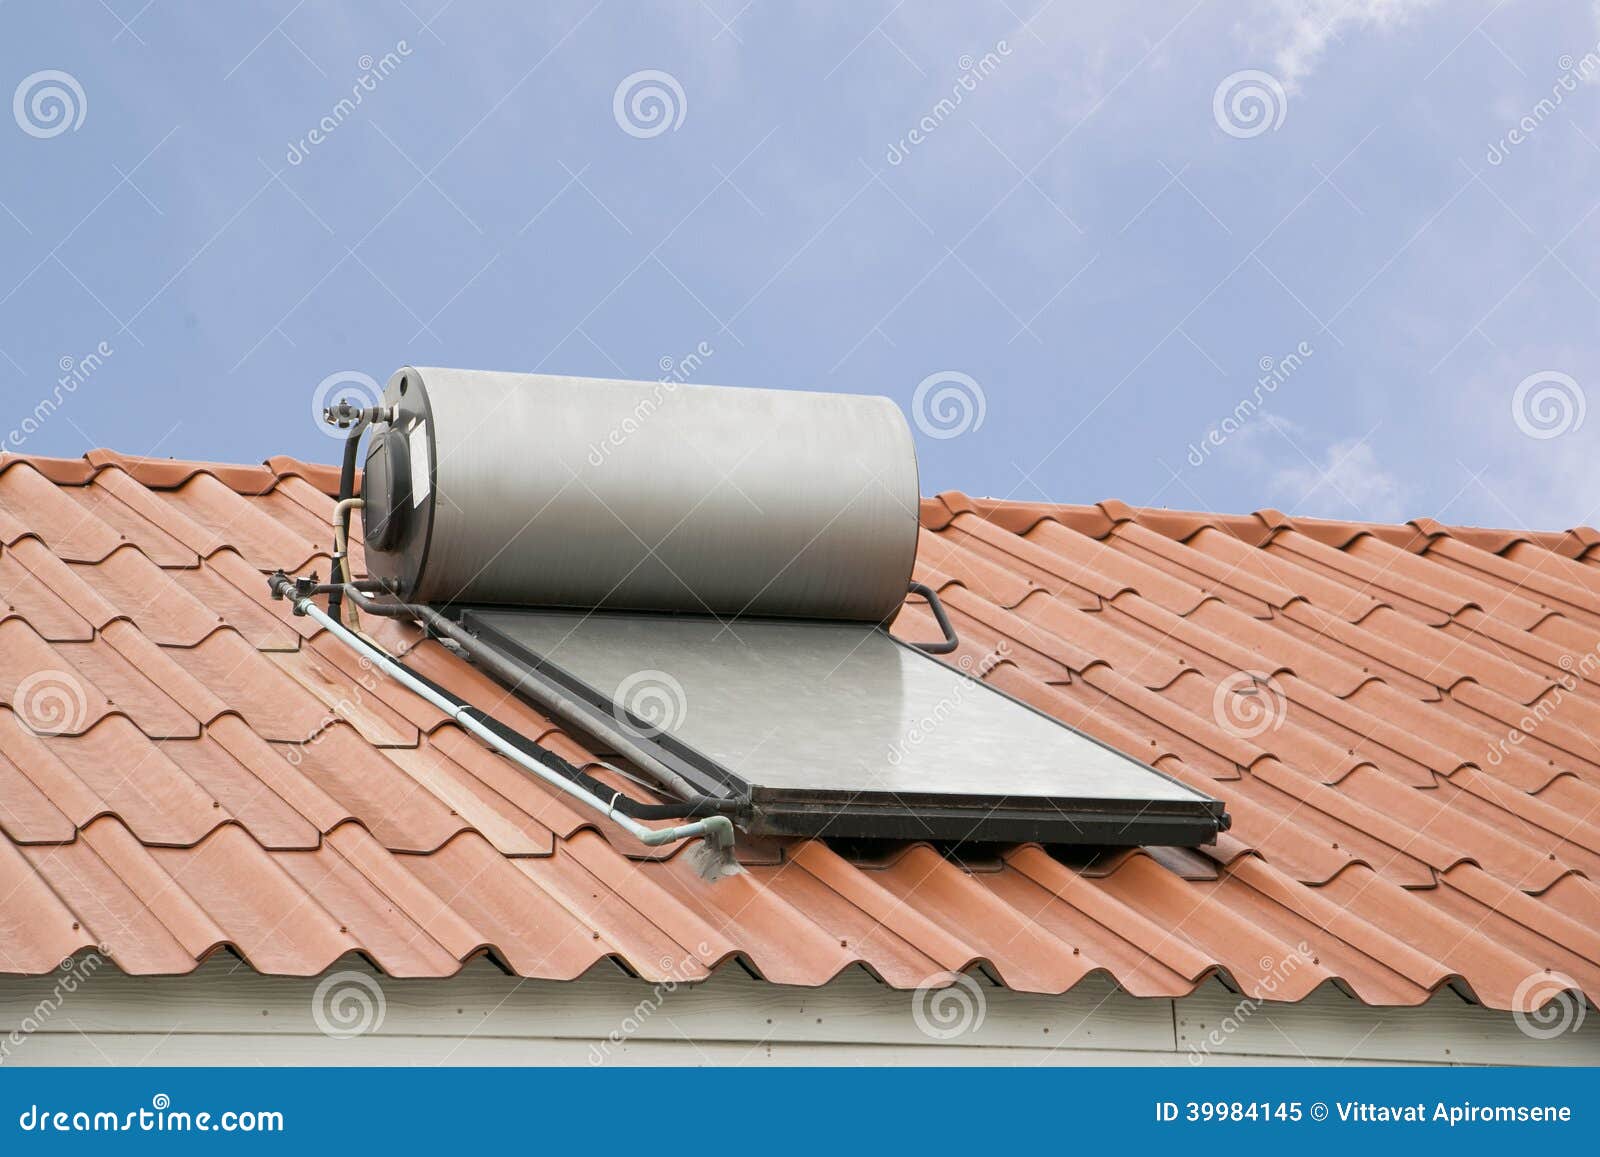 Solar Panel For Hot Water System On Roof Stock Photo - Image: 39984145